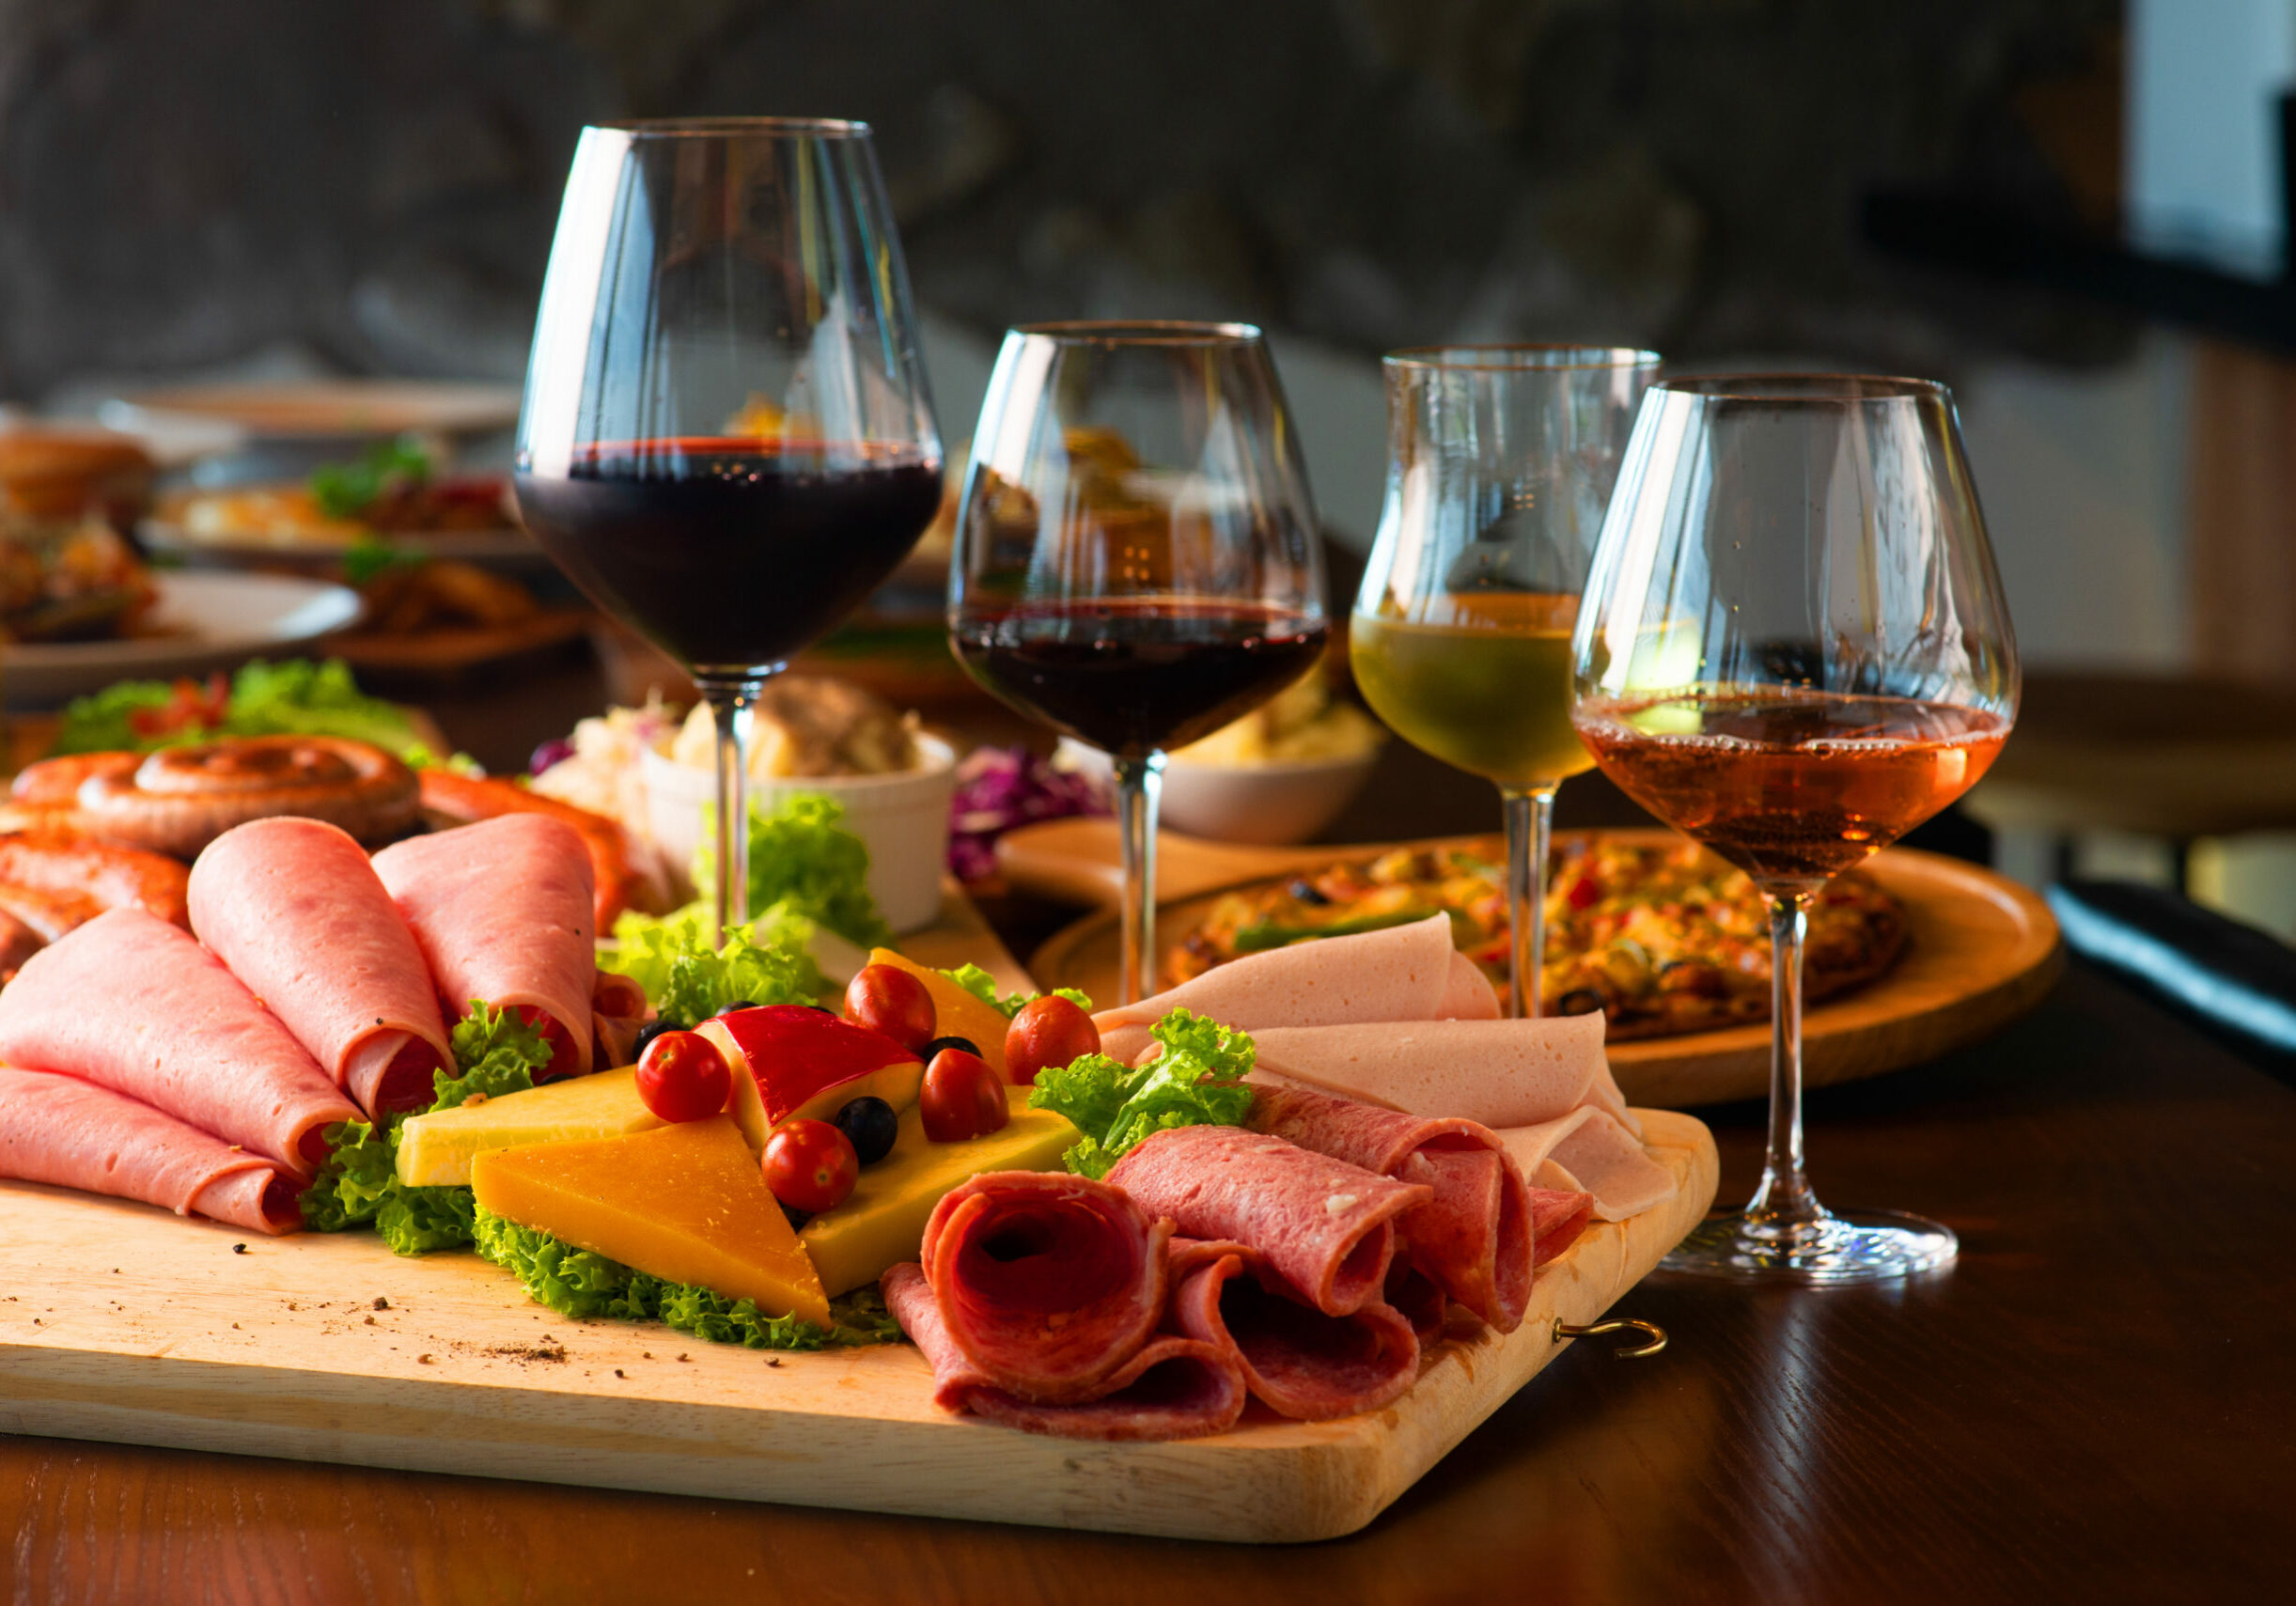 Antipasti platter with different meat and cheese products on wooden board